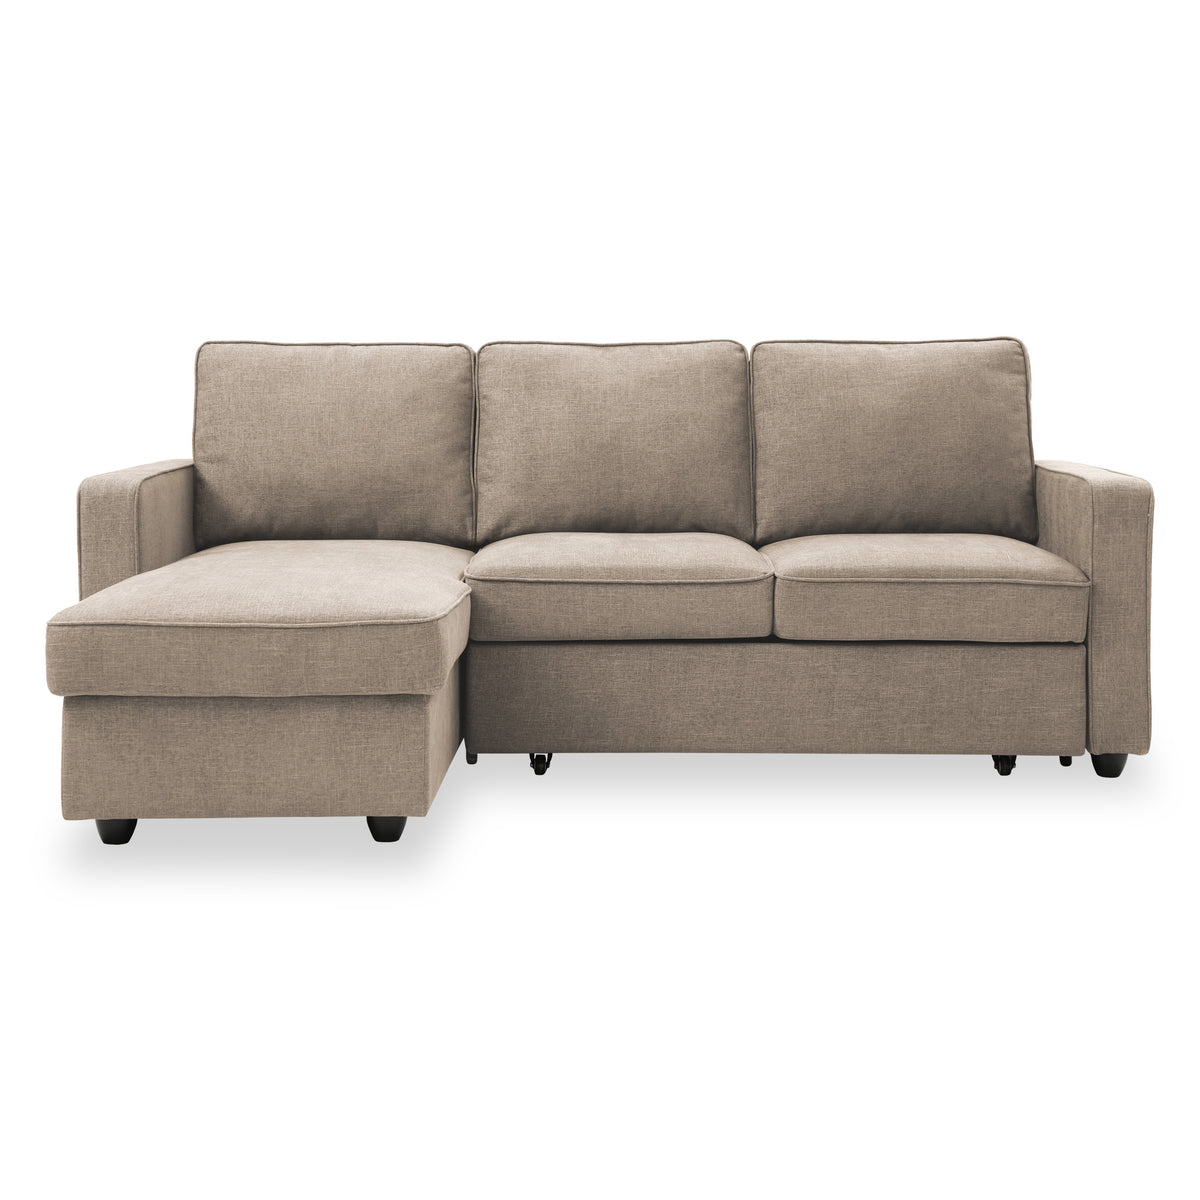 Soldier Natural 3 Seater Corner Chaise Sofa from Roseland Furniture